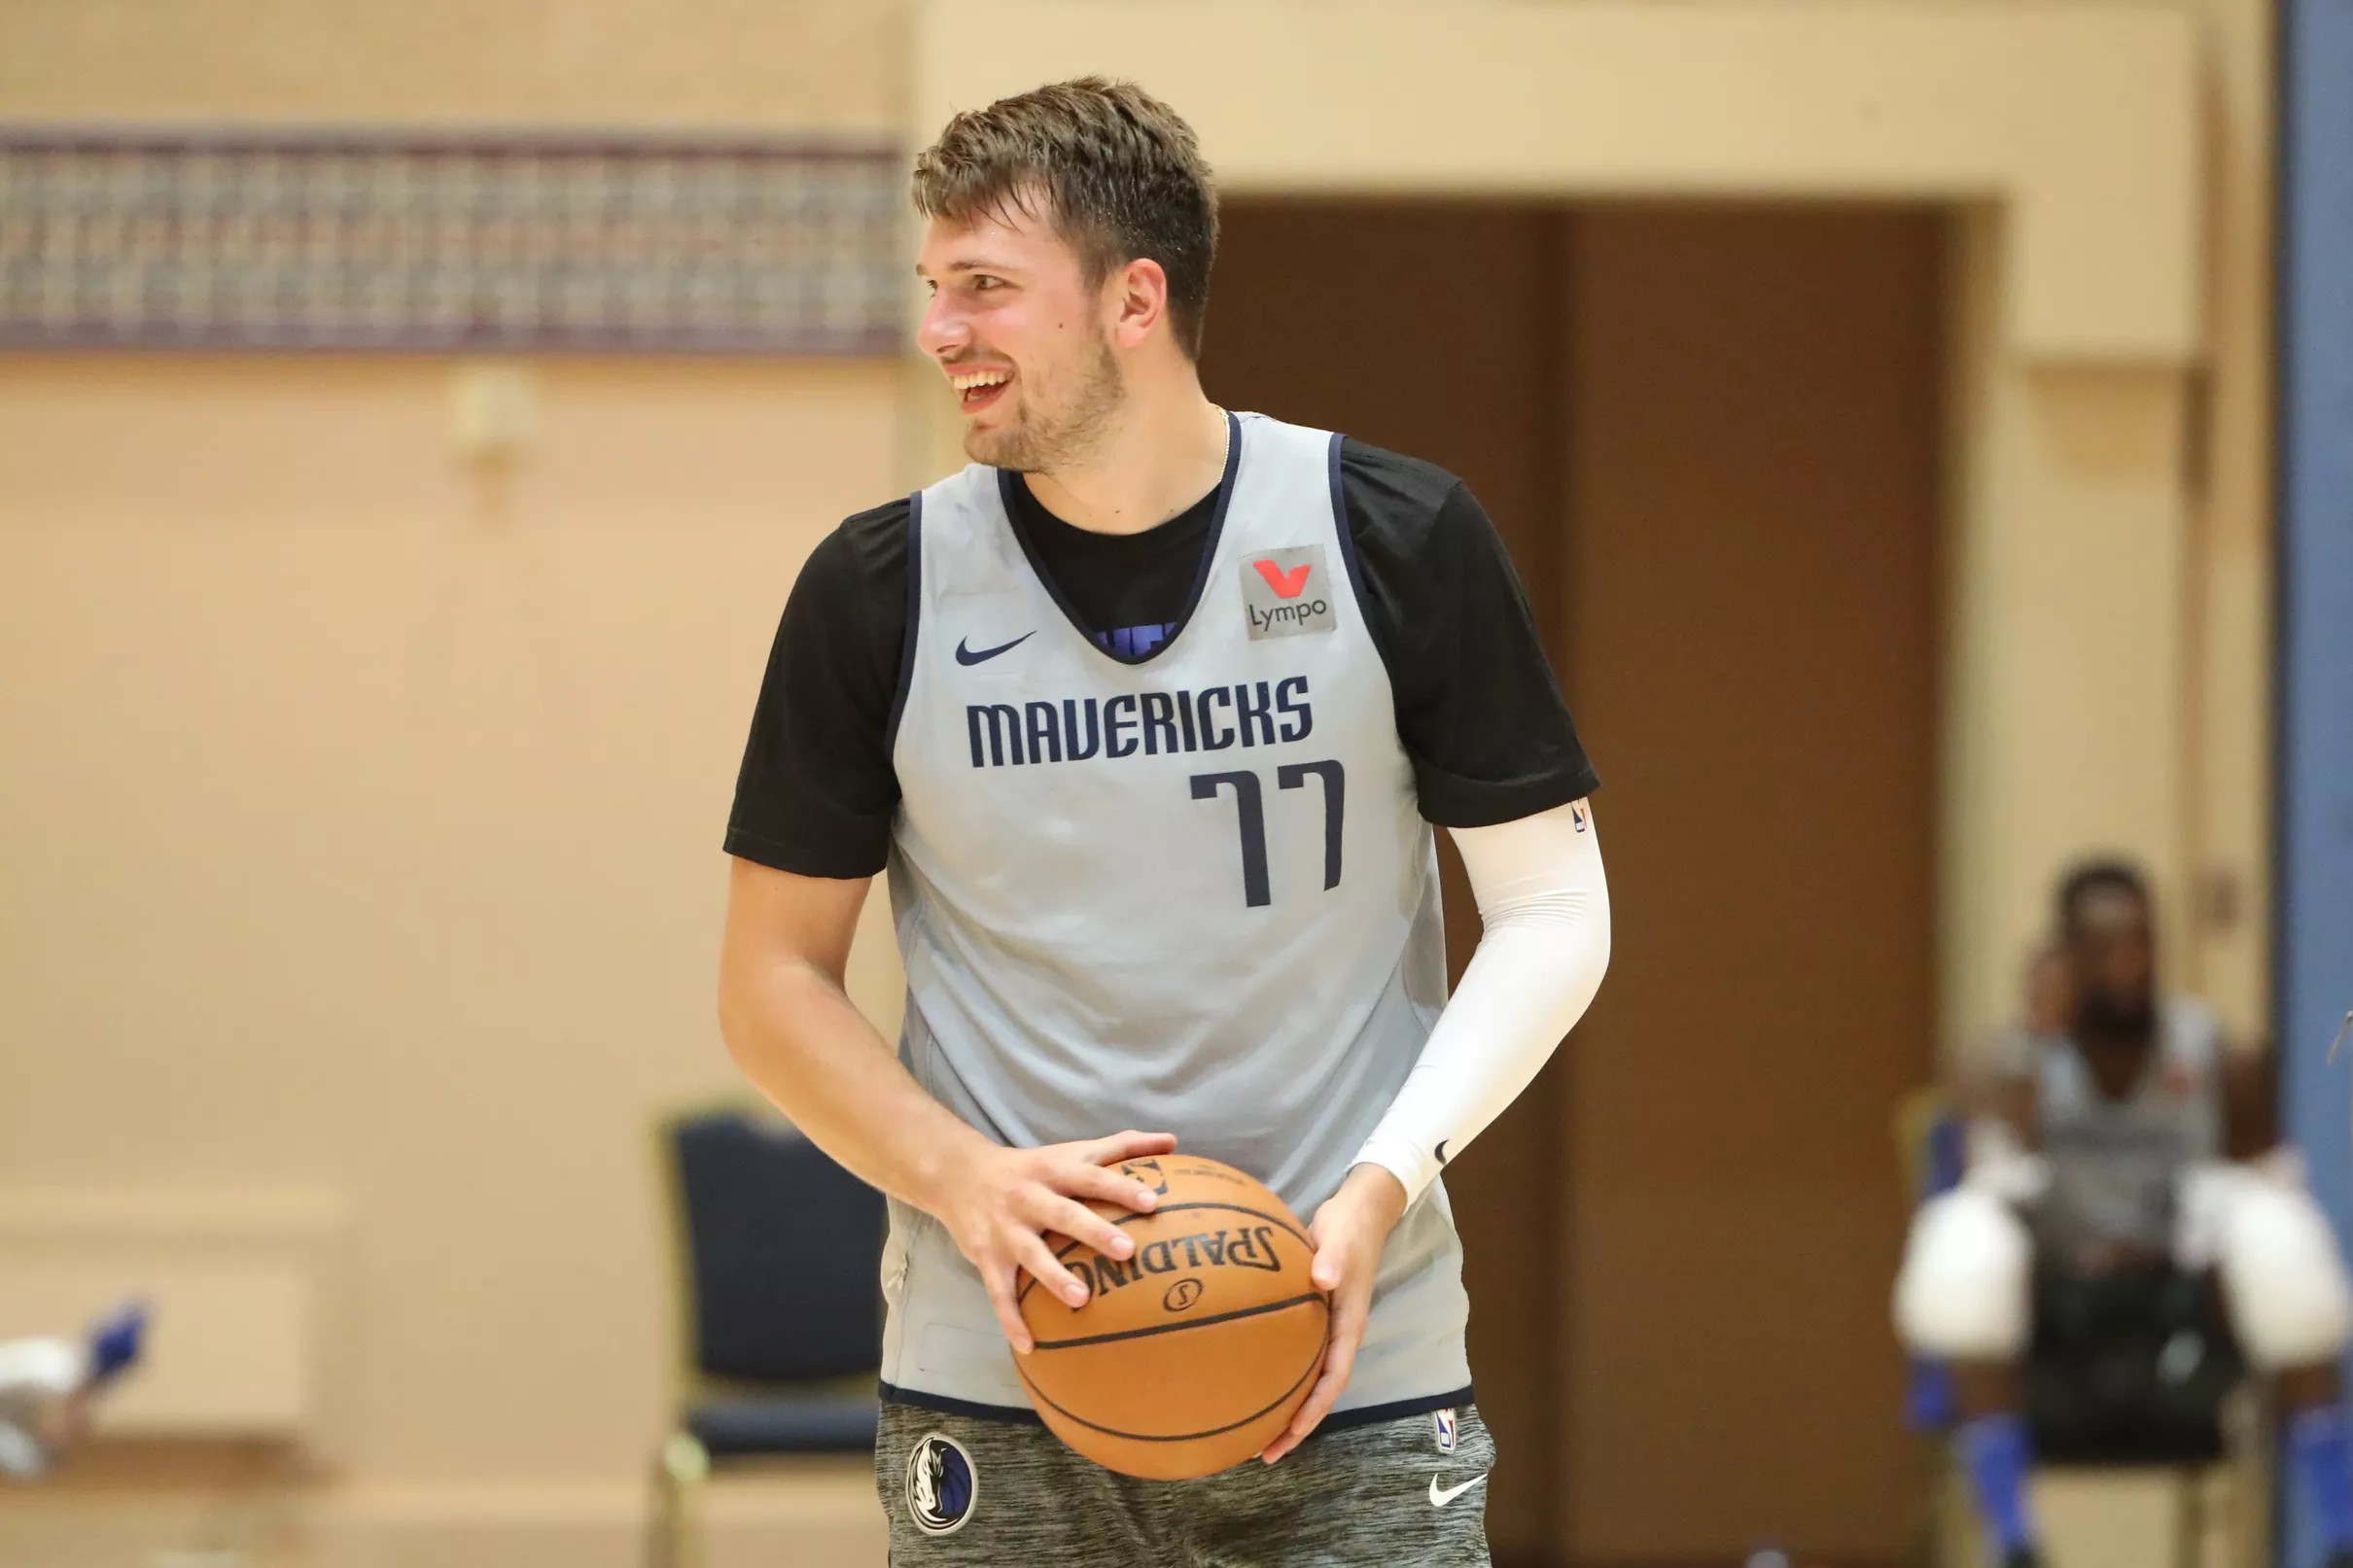 It's time for Luka Doncic to grow up - Mavs Moneyball